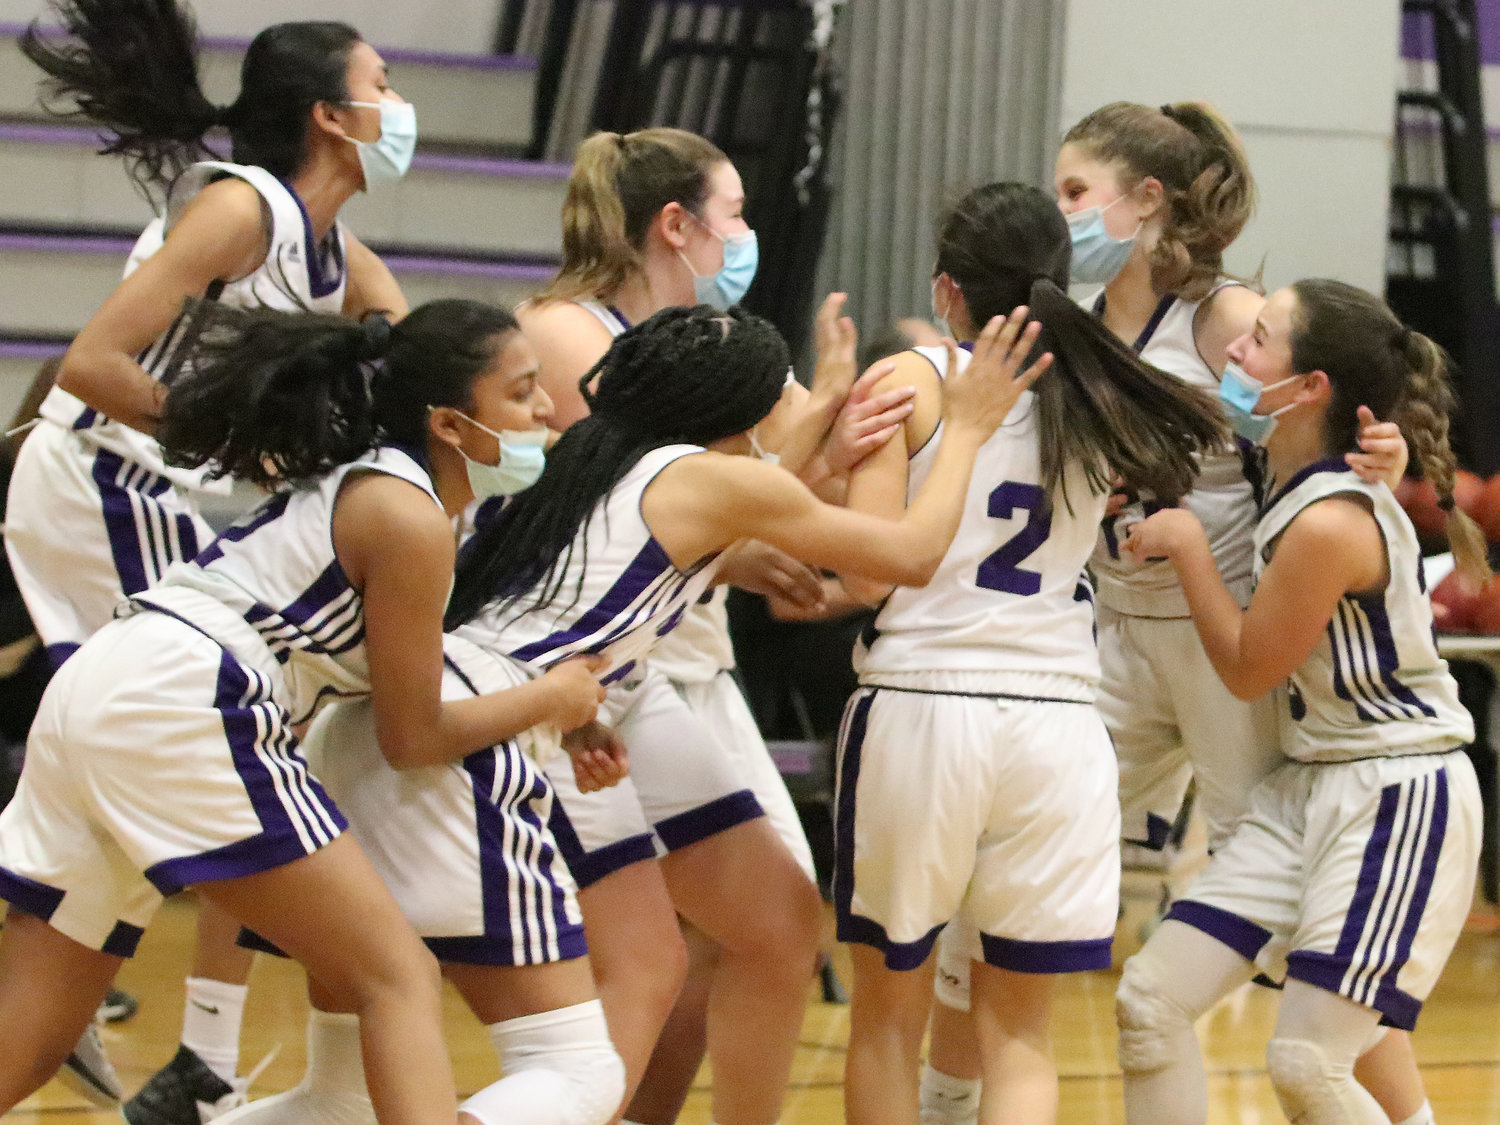 The Mt. Hope girls basketball team celebrates after defeating Woonsocket, 39-34 in the D-III semifinals on Wednesday night. The team will play in the championship game on Saturday.